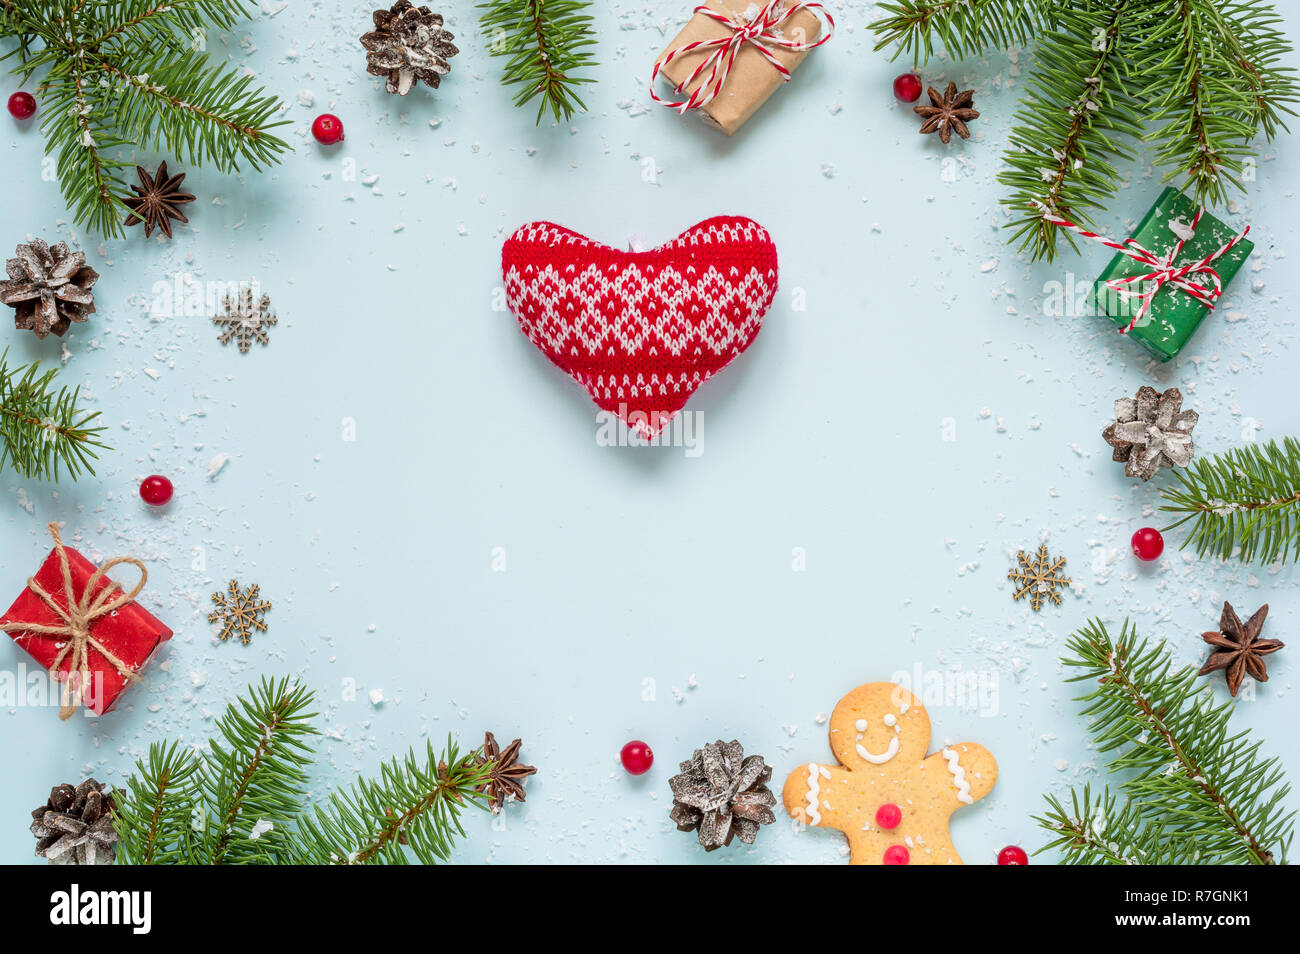 Christmas frame made of fir branches, red berries, gift boxes and pine cones with knitted heart on blue background. Christmas background. Flat lay. to Stock Photo